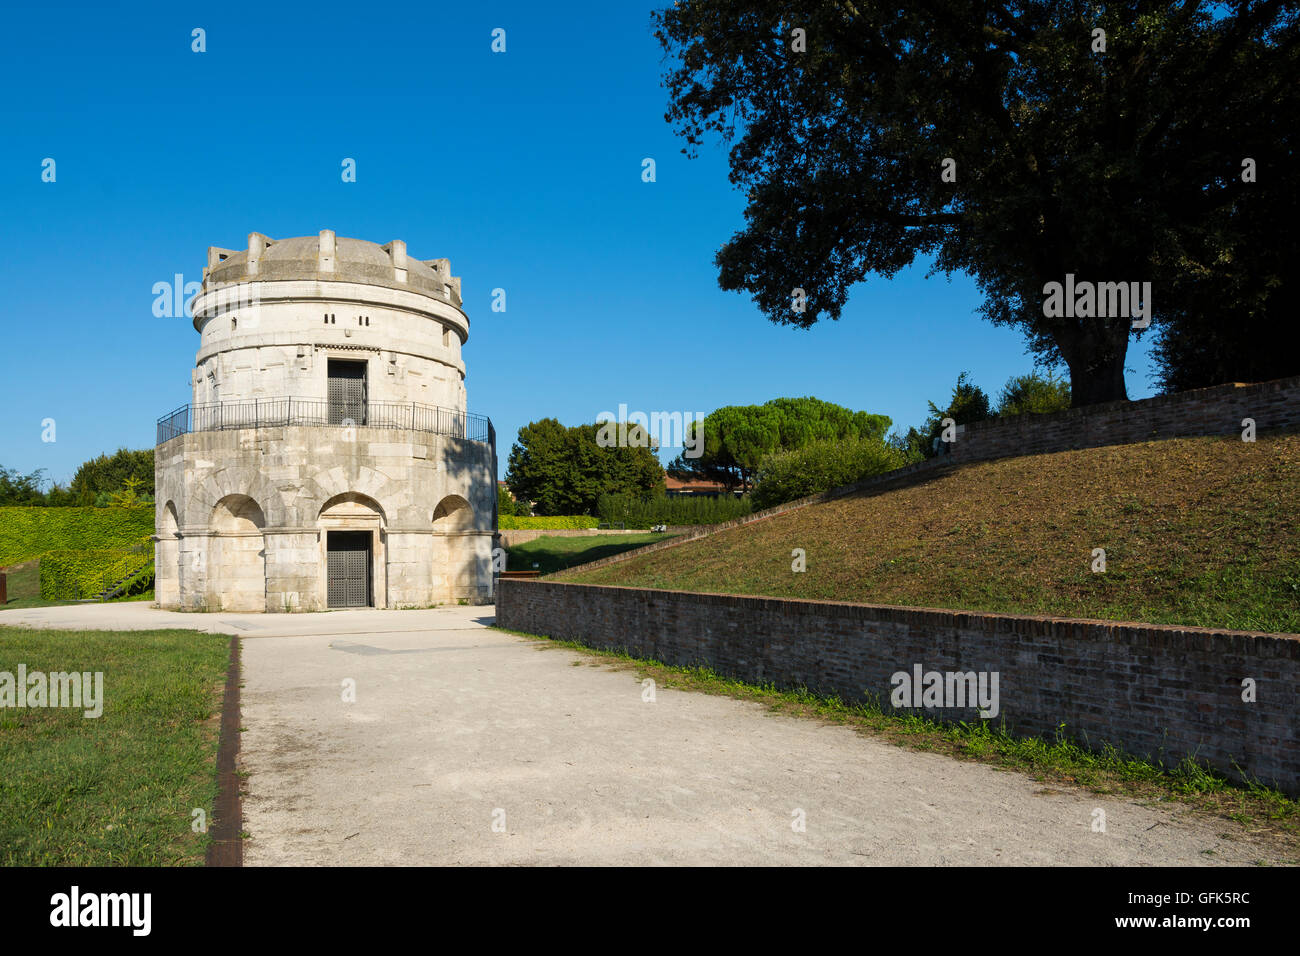 Ravenna,Italy-august 21,2015:mausoleum of Theodoric in Ravenna-Italy,during a sunny day. Stock Photo